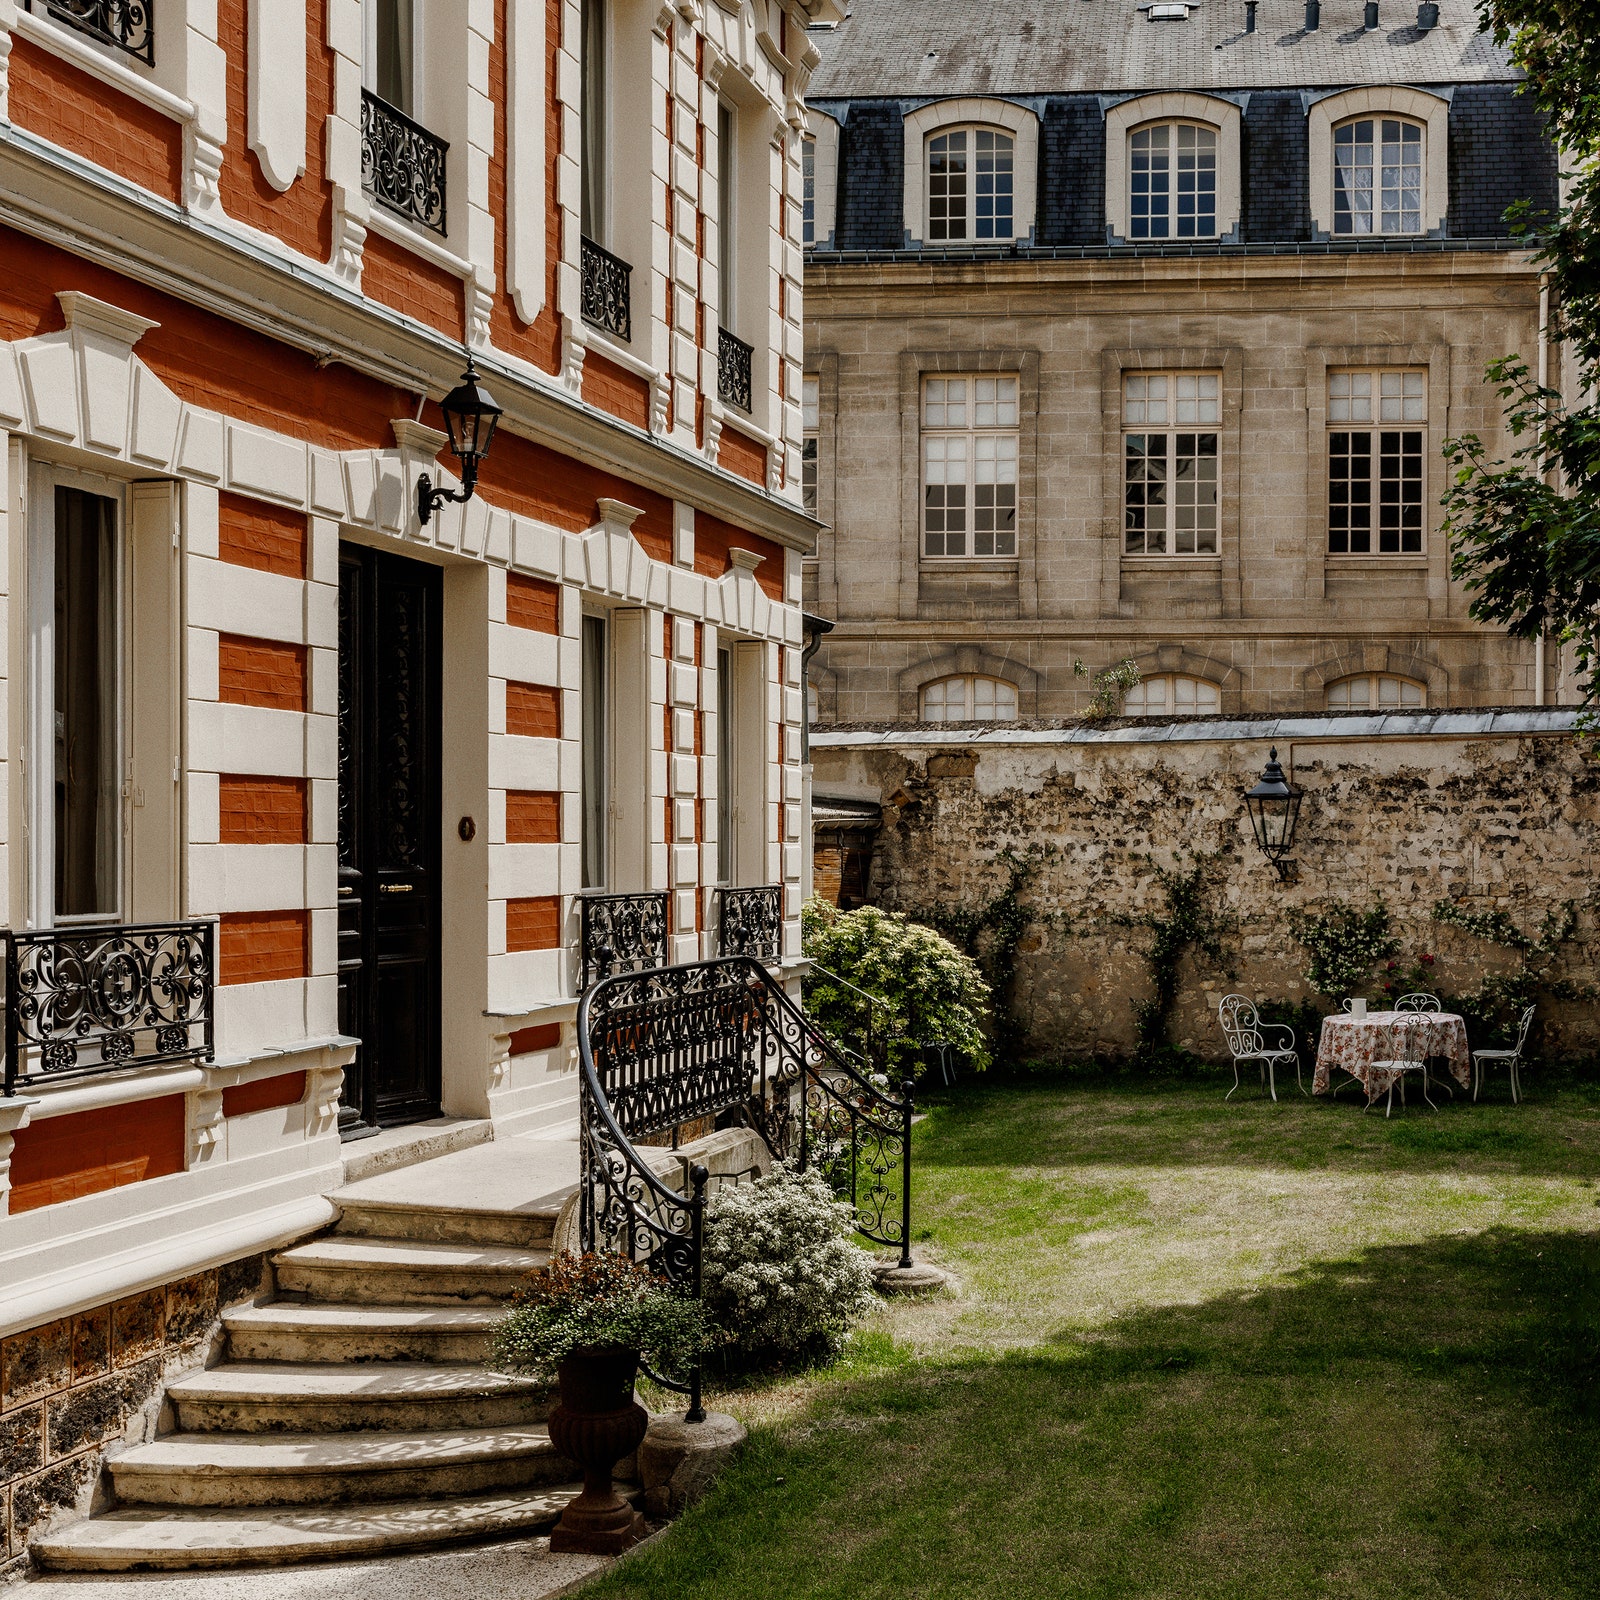 Four dreamy Paris houses that will make you want to move there